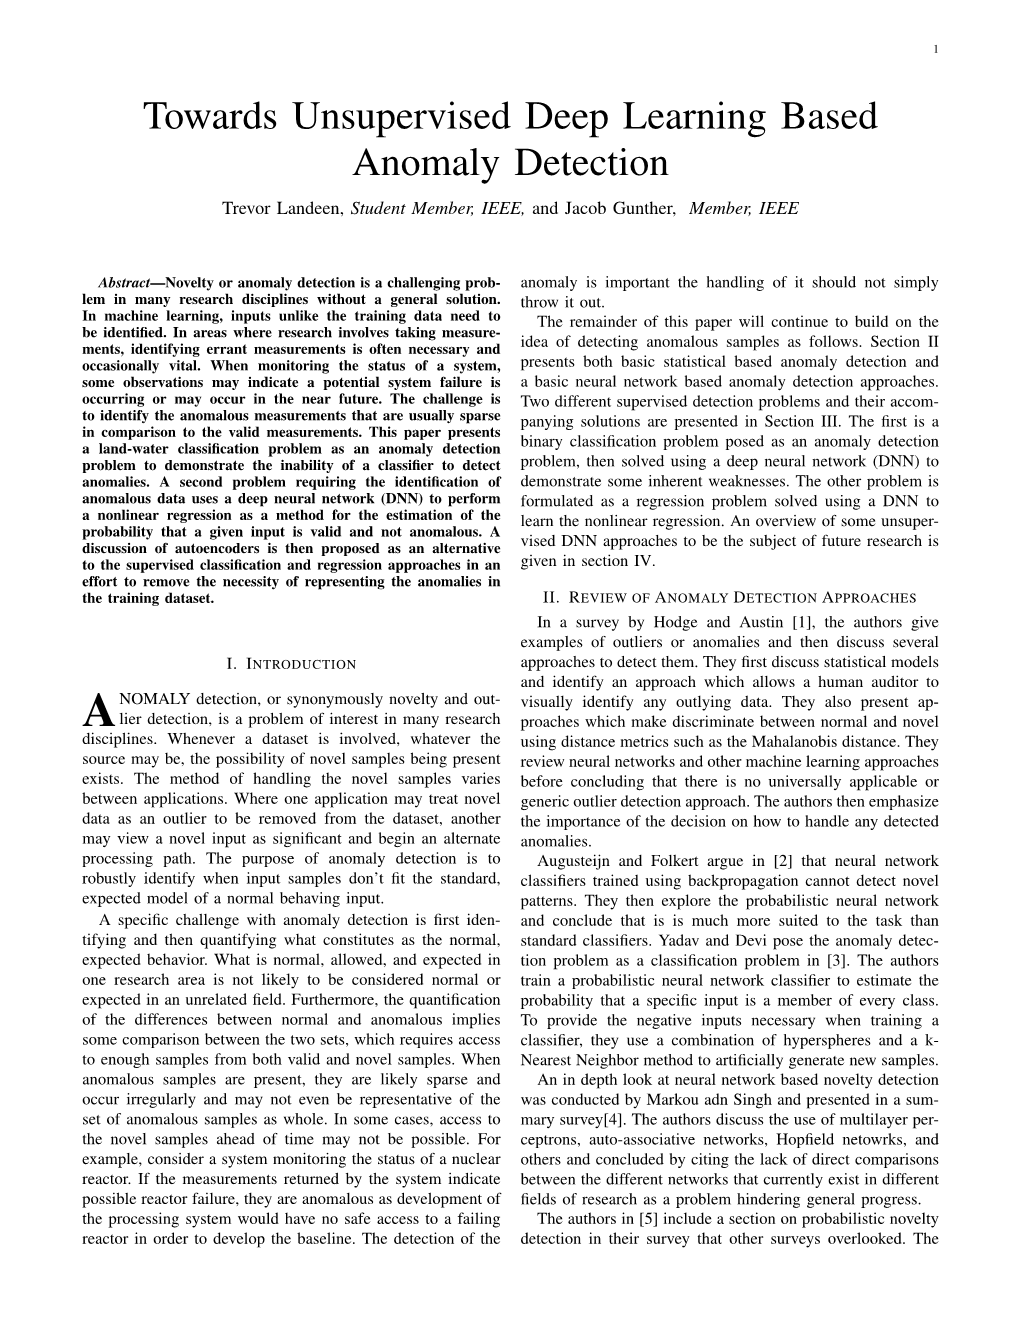 Towards Unsupervised Deep Learning Based Anomaly Detection Trevor Landeen, Student Member, IEEE, and Jacob Gunther, Member, IEEE